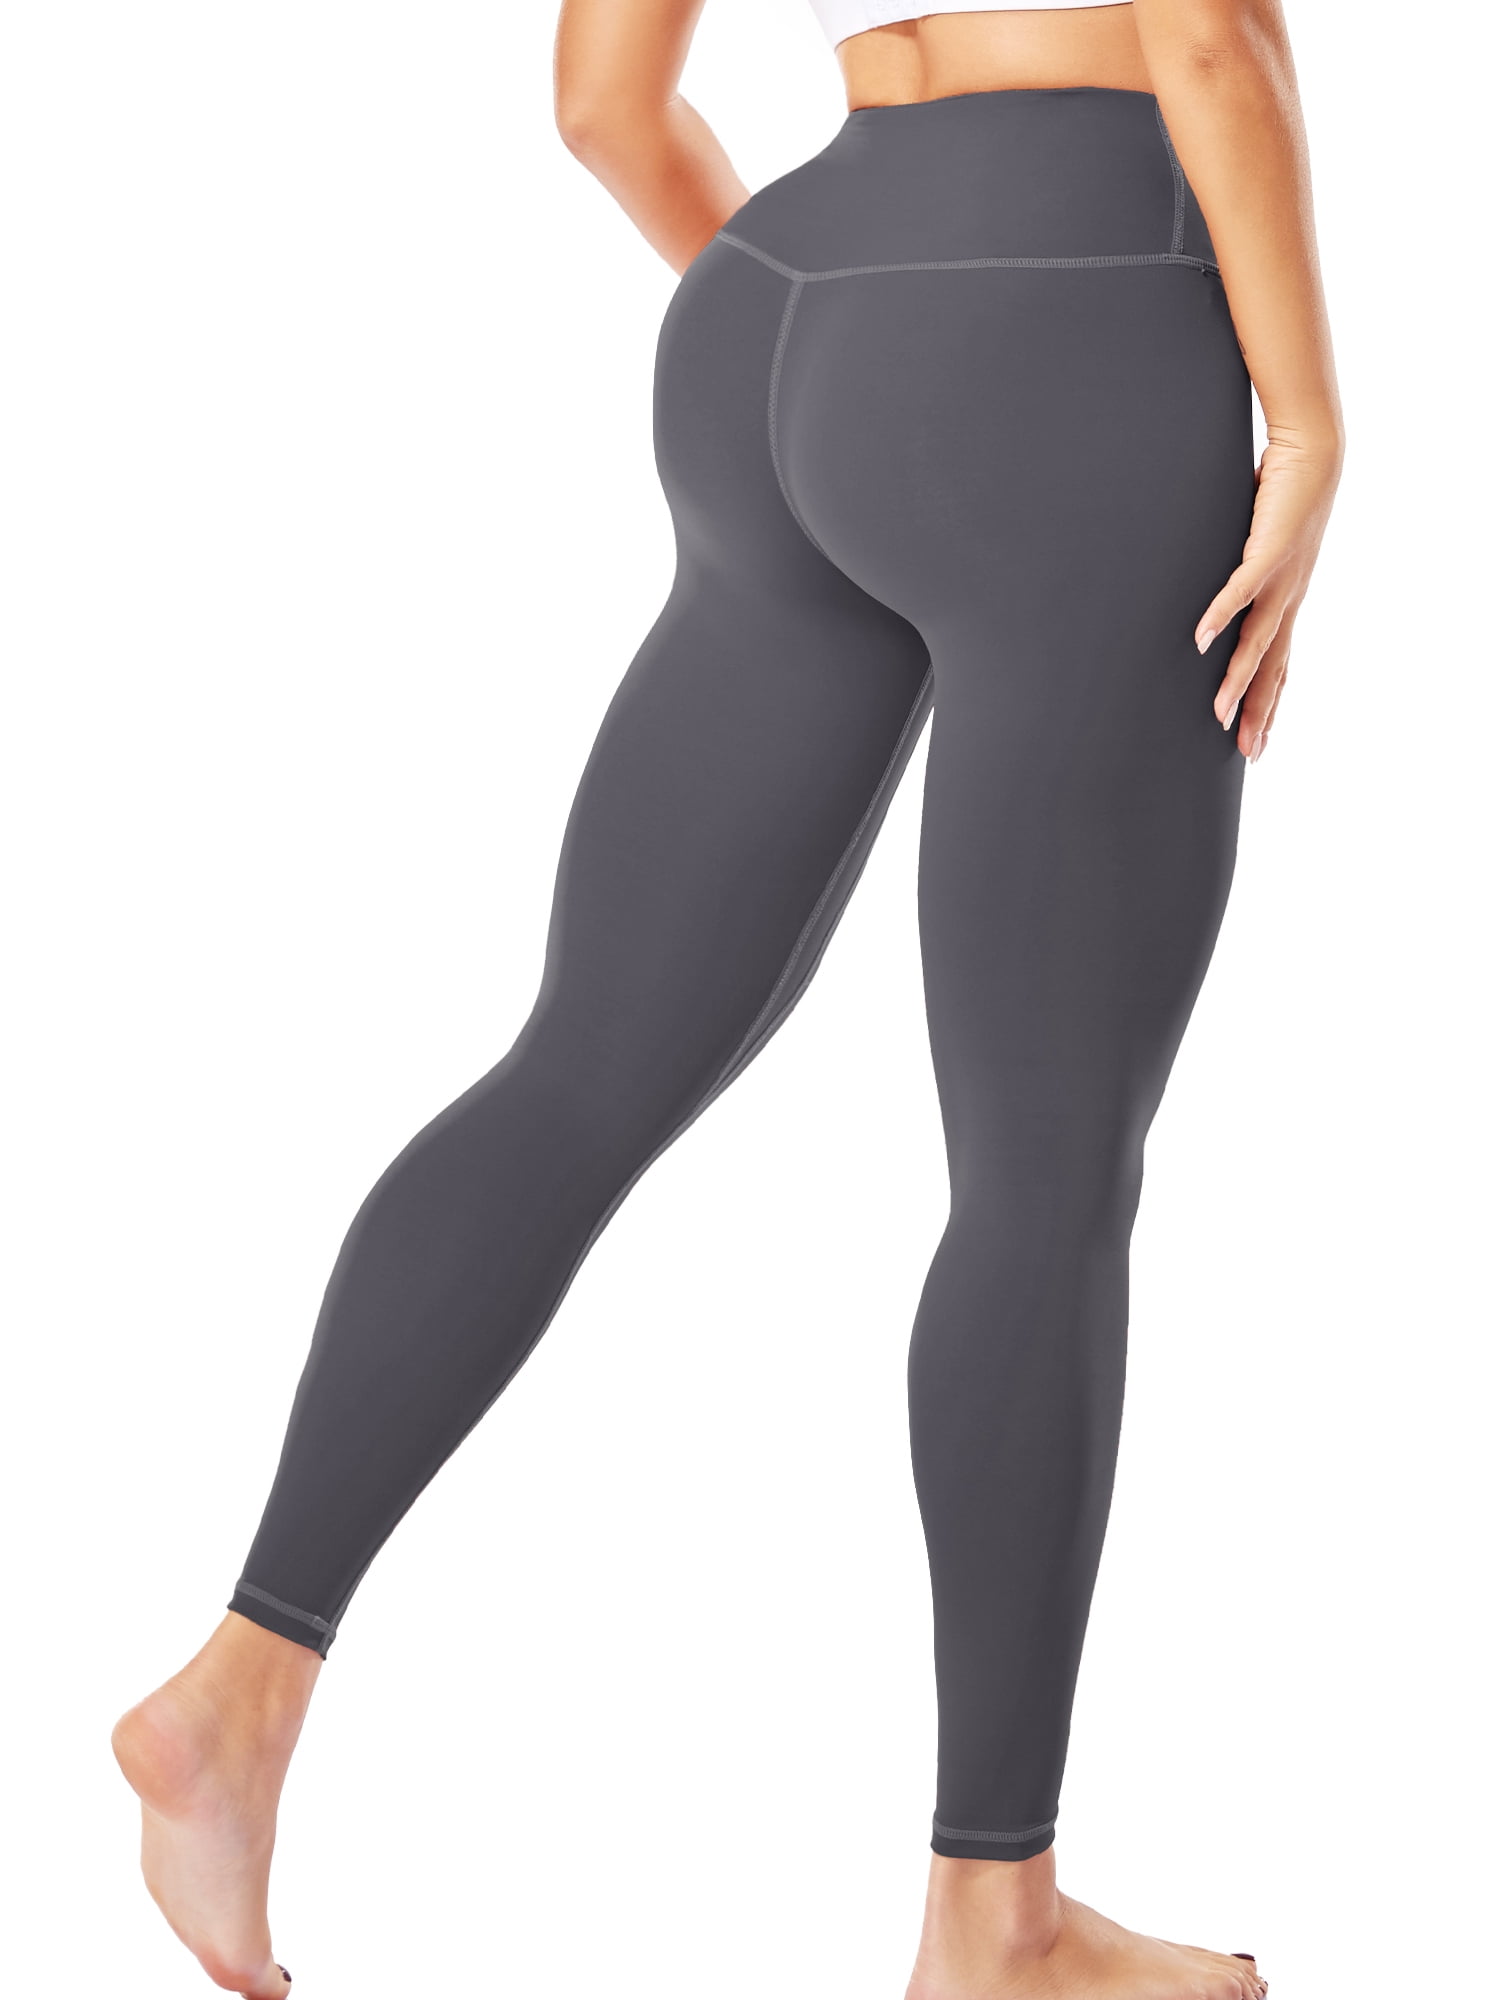 Morbuy Sport Running Gym Workout Fitness Plus Size Pants Ladies Compression Stretch Tights S, Dragonfly Yoga Leggings for Women High Waist